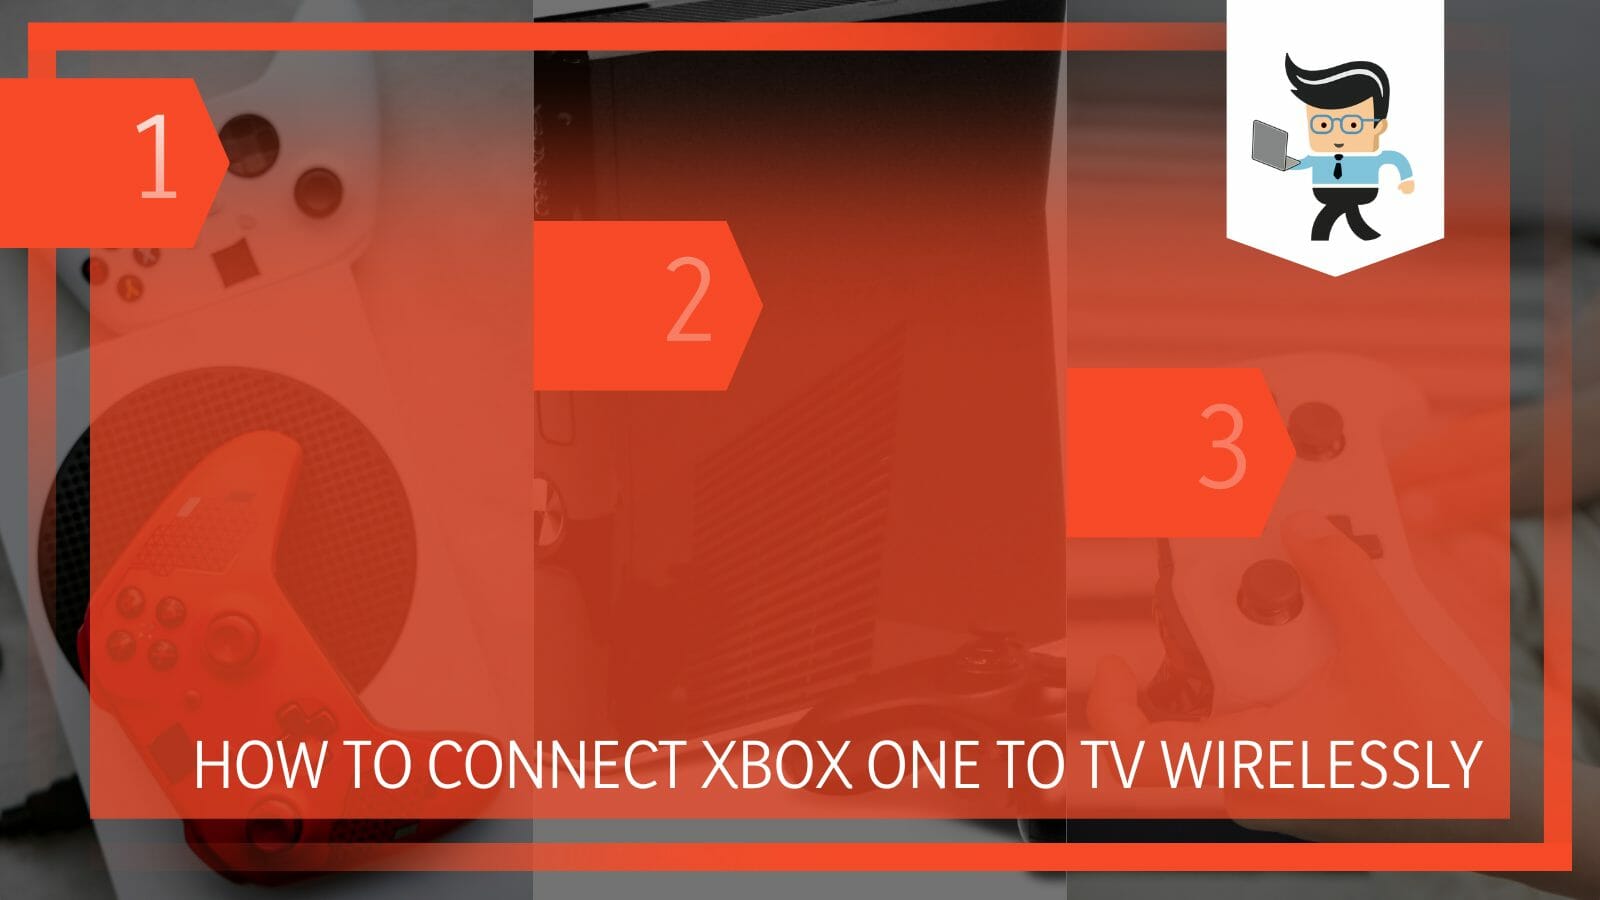 How to Connect Xbox One to TV Wirelessly